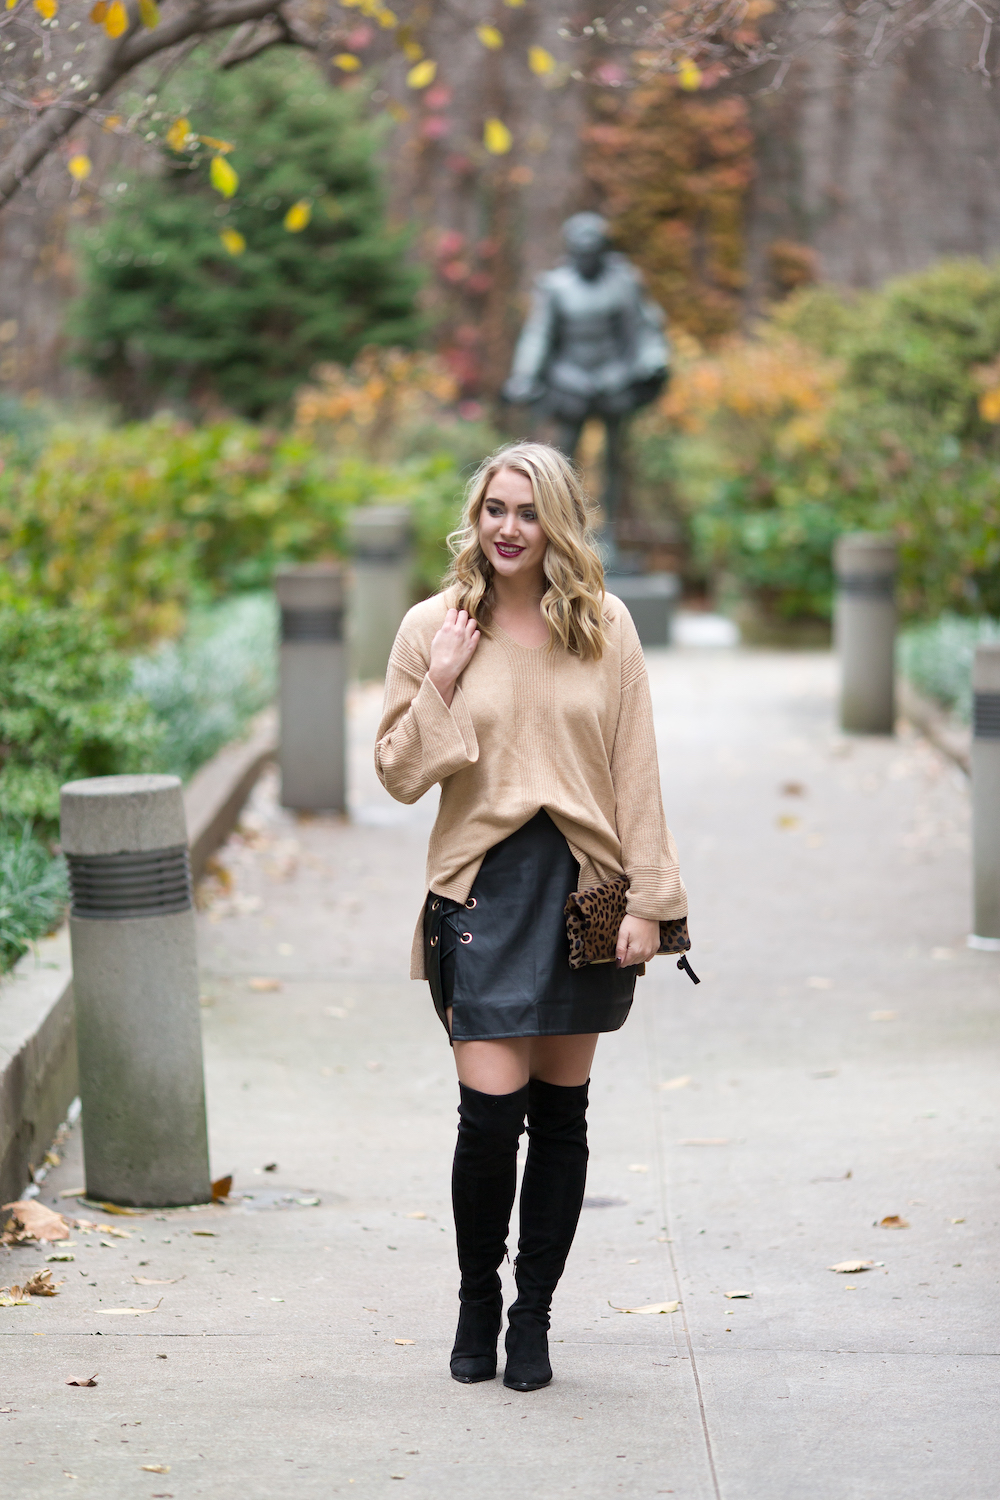 Bell Sleeved Sweater + Lace Up Leather - Kayleigh's Kloset